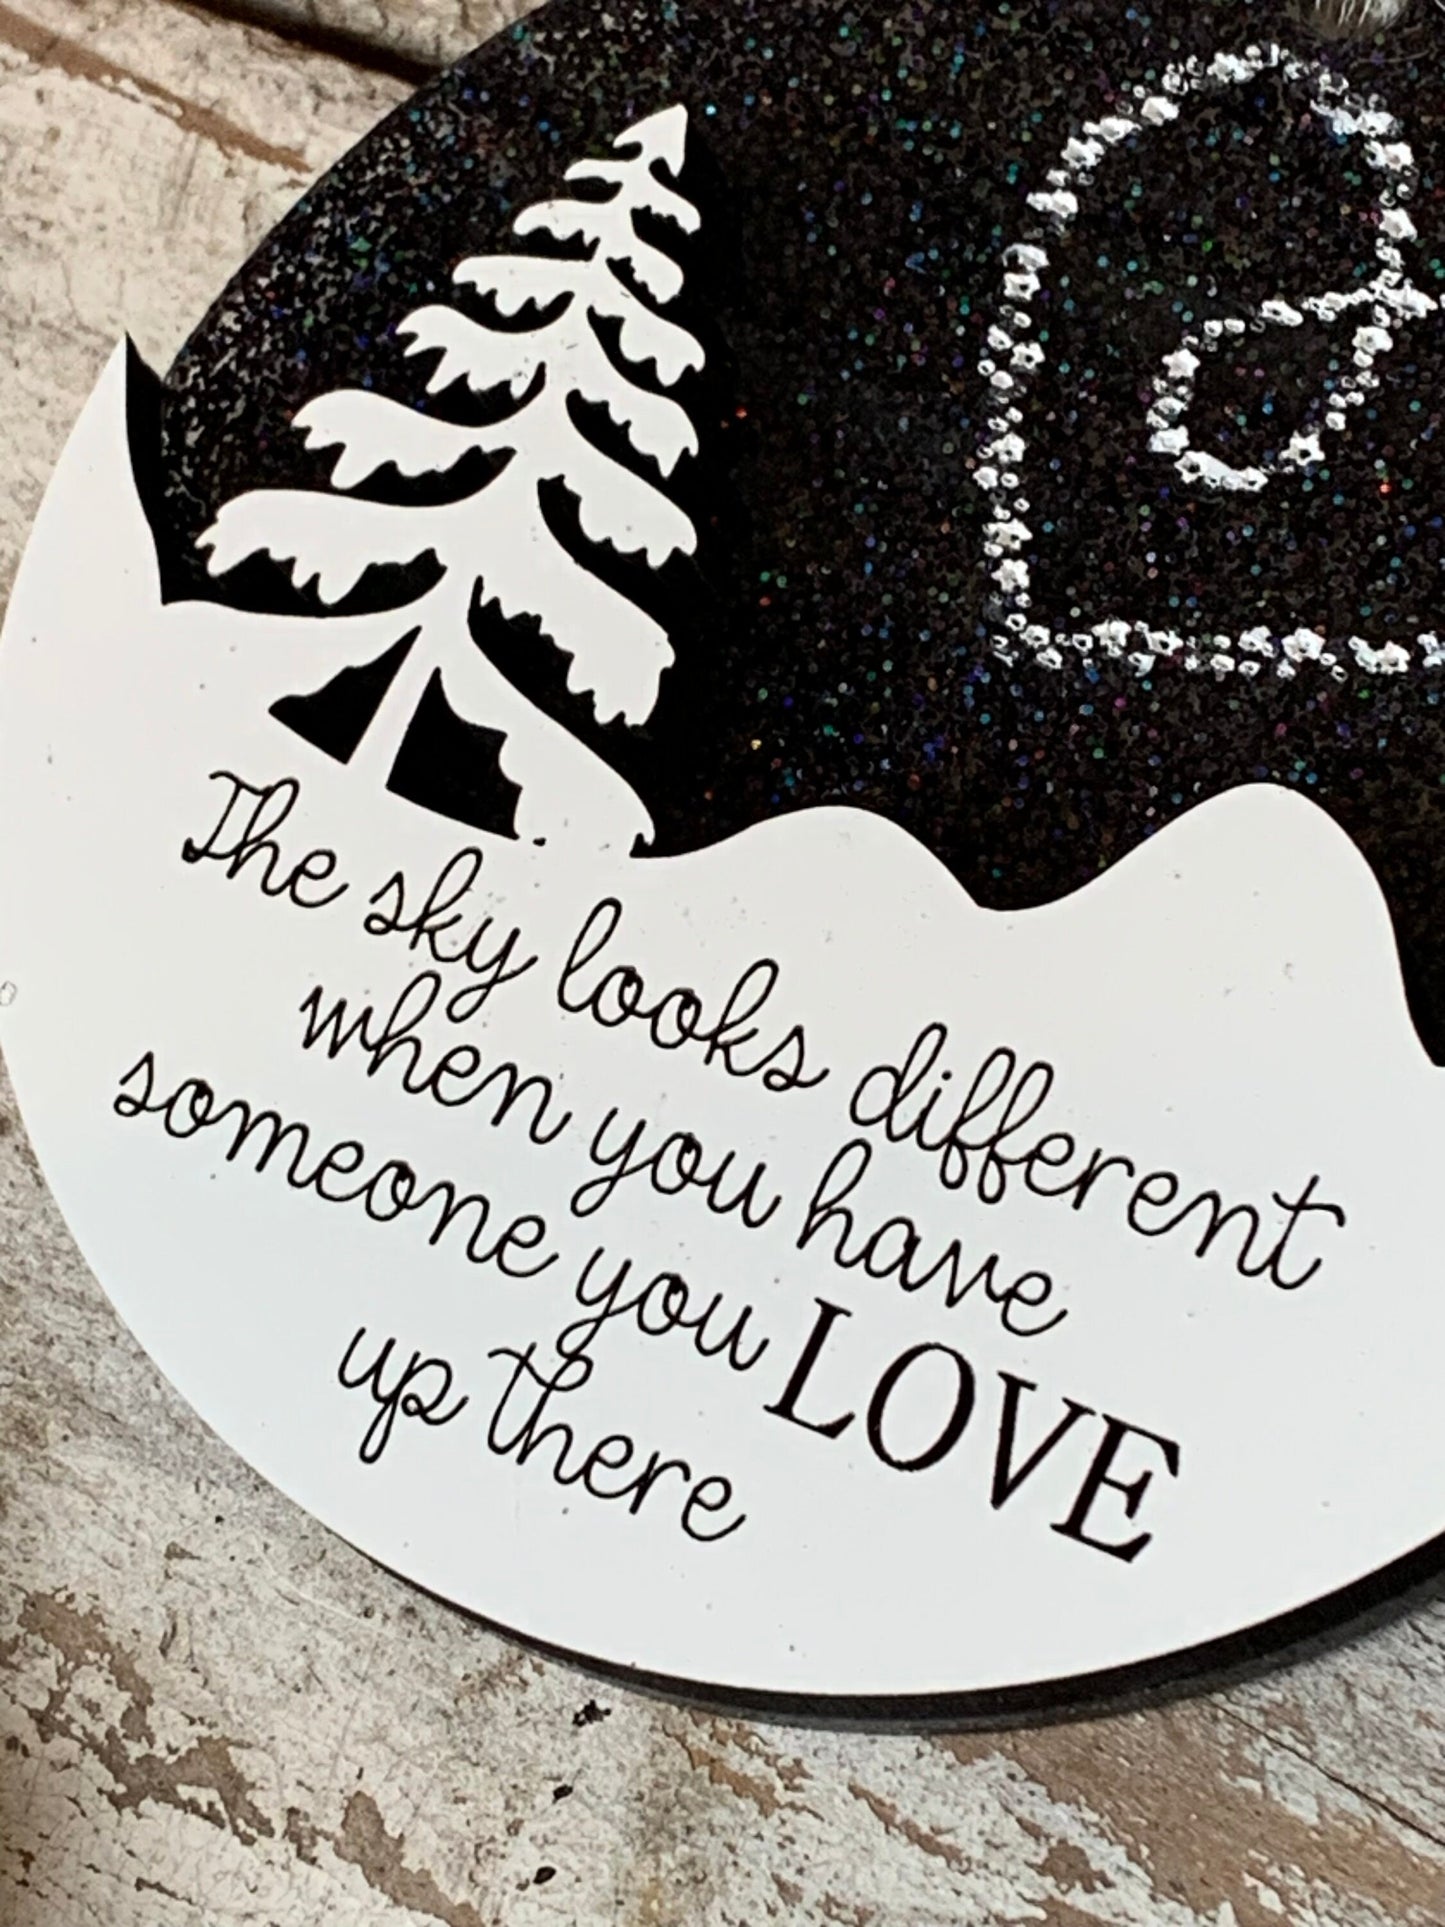 Loved One Memorial Christmas Tree Ornament | Remembrance Christmas ornament | The Sky Looks Different Up There